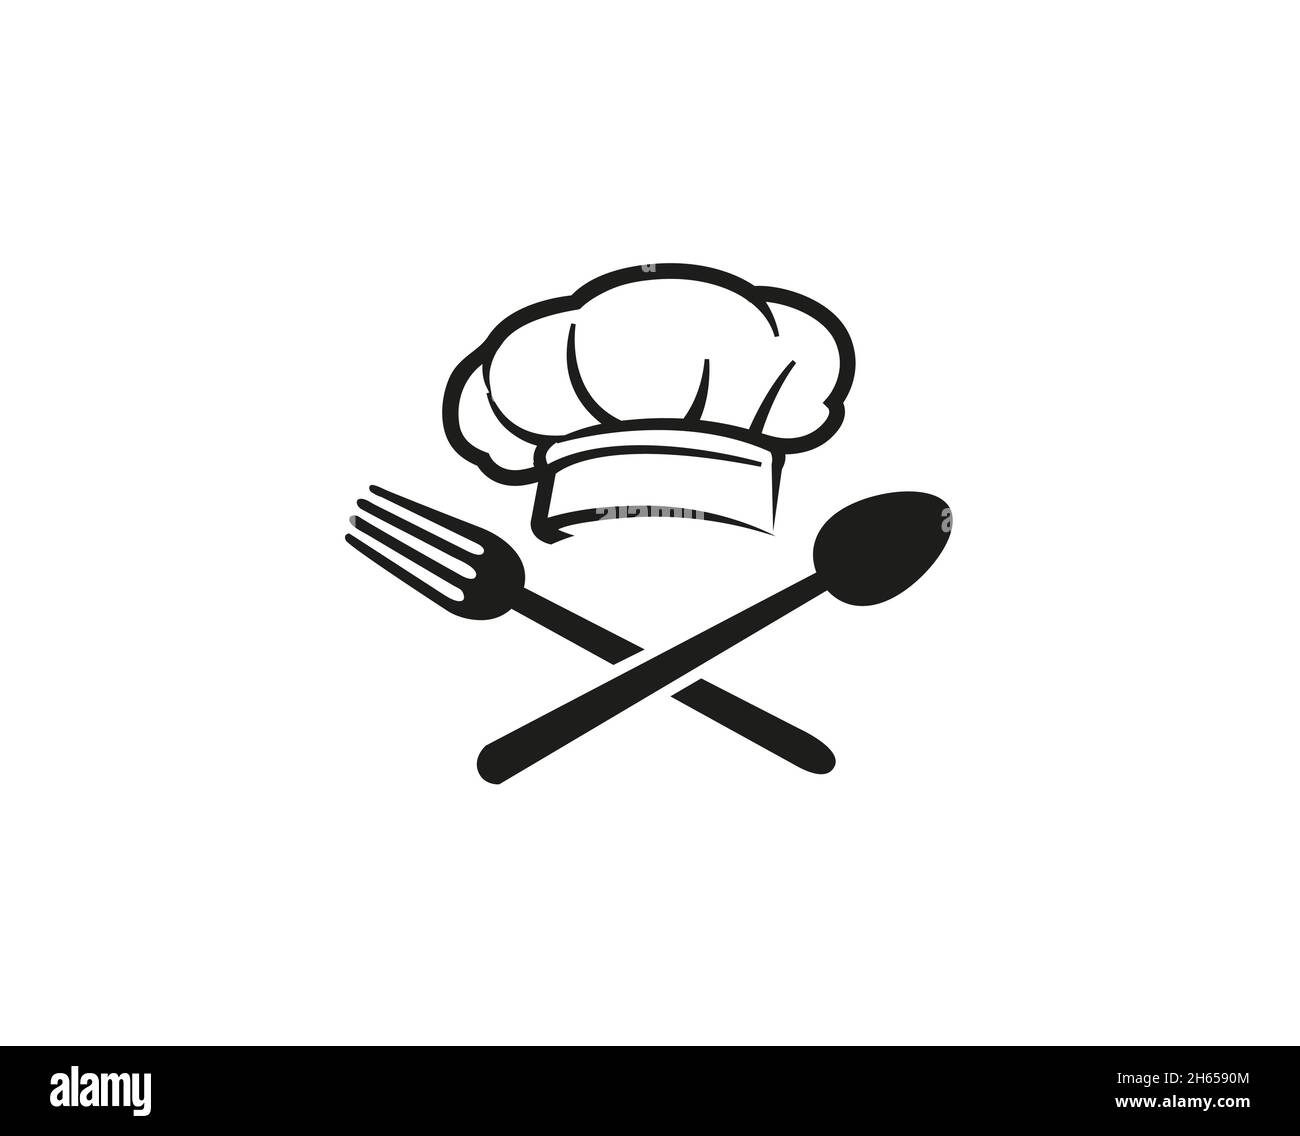 chef logo design, fork and spoon logo, food icon, restaurant label icon,  Cooking symbol, Cooks hat with fork and spoon Stock Vector